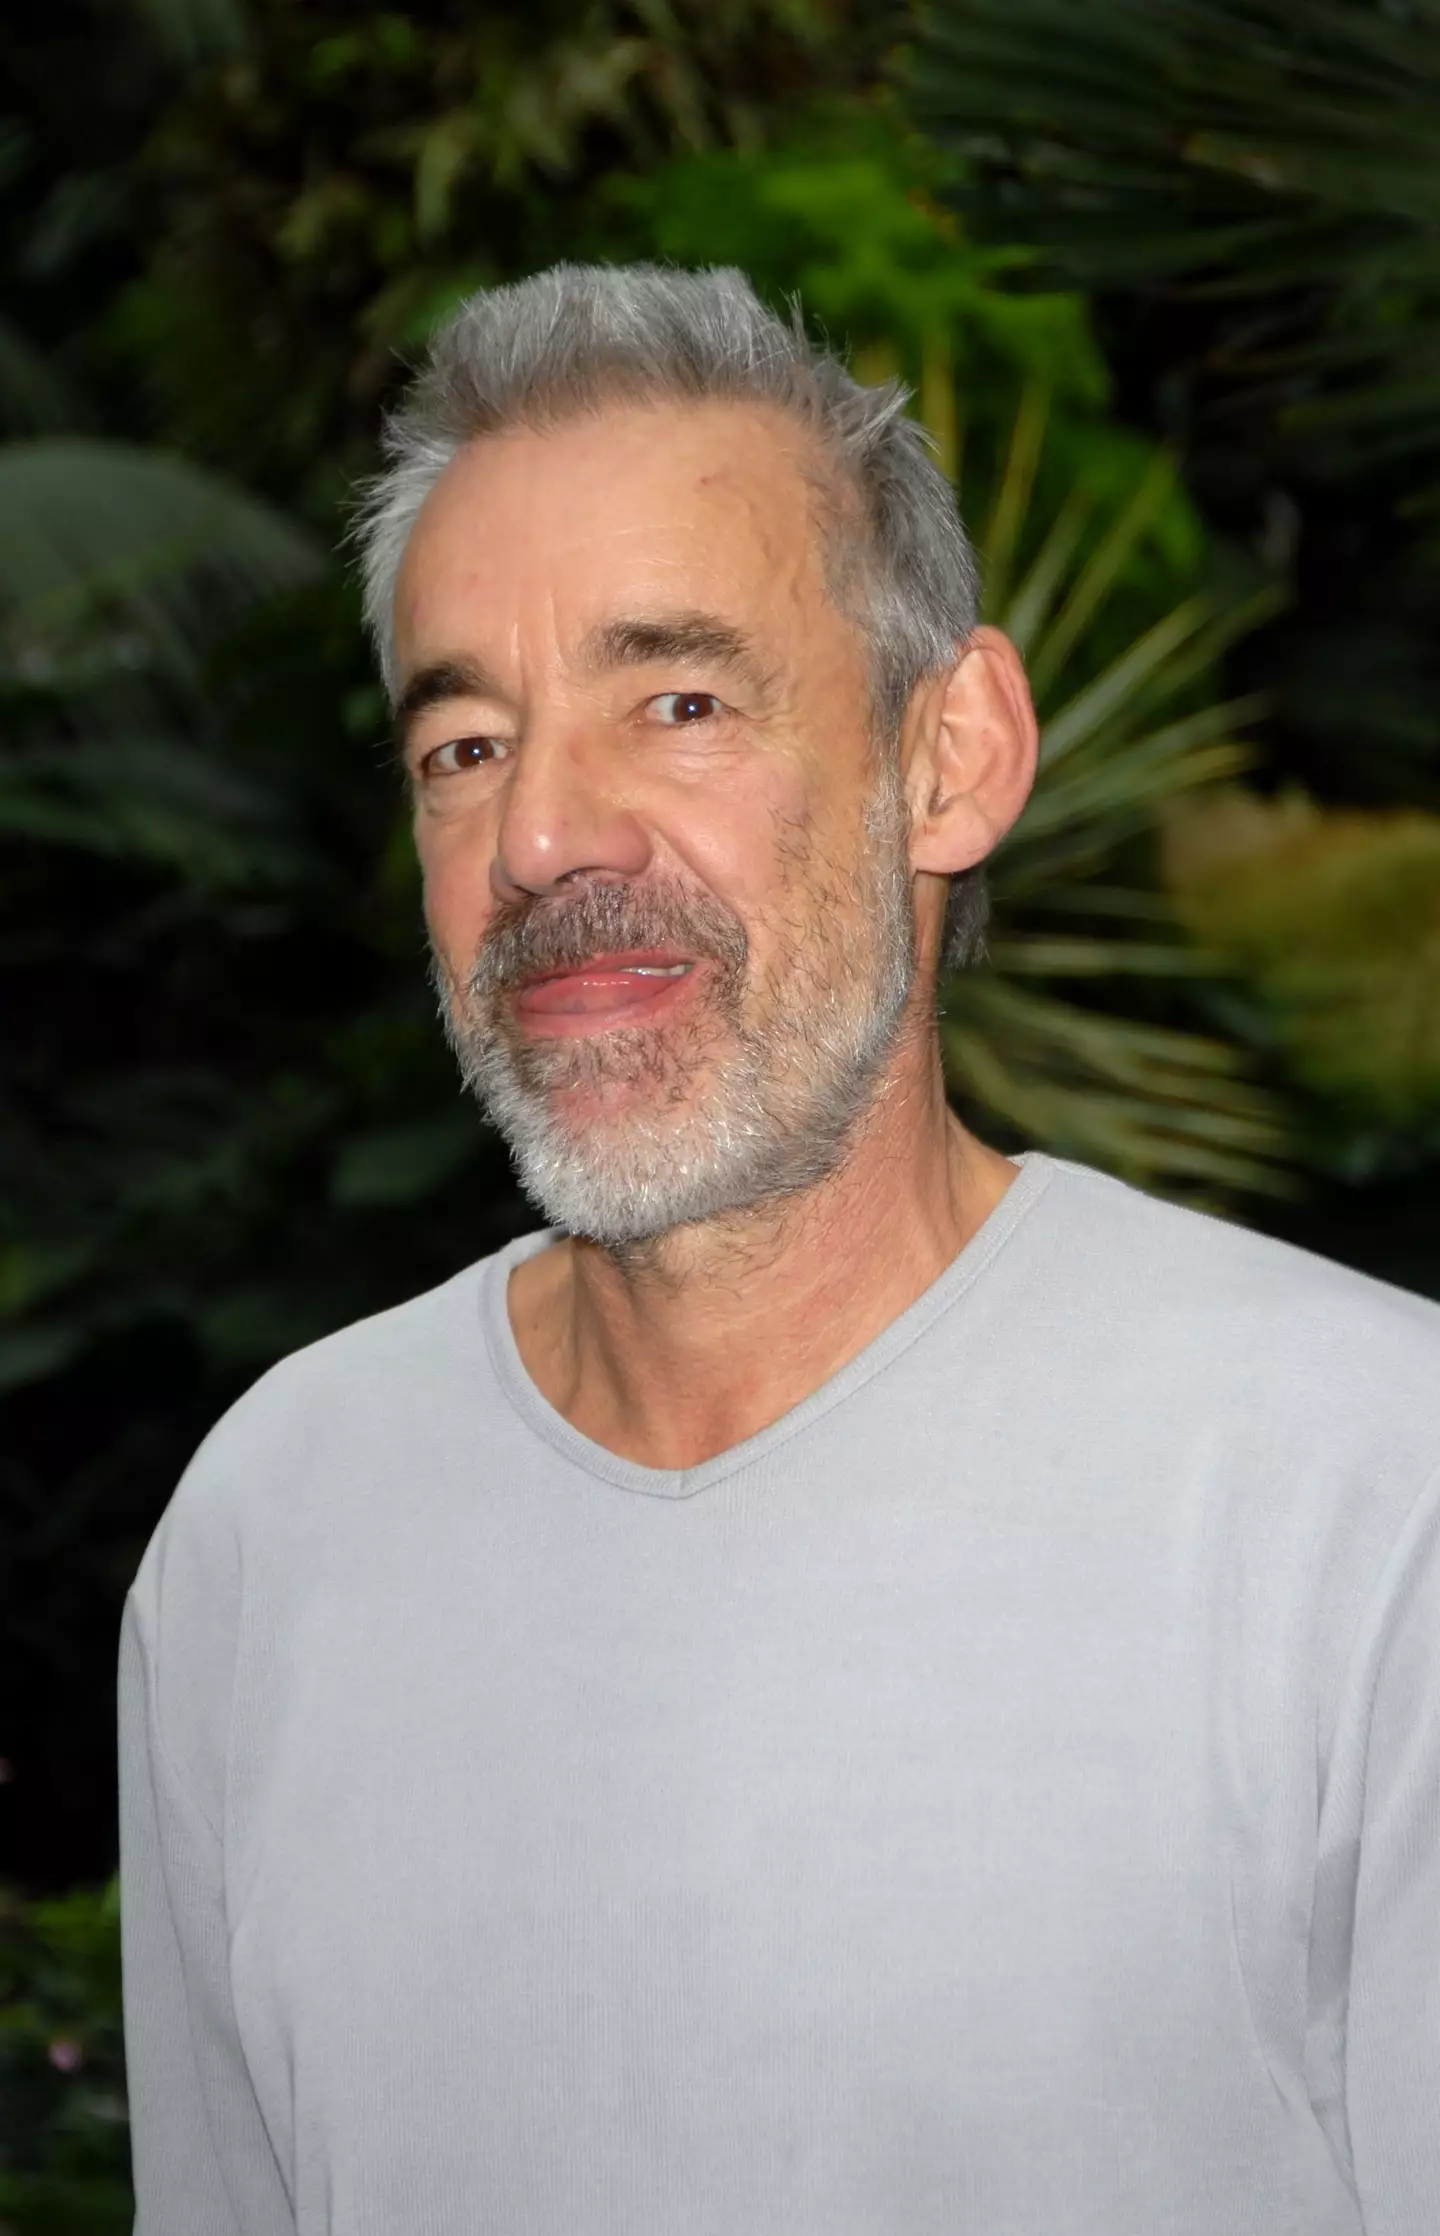 Roger Lloyd Pack was best known for his role as Trigger in Only Fools and Horses, but made a lasting impression on the HP franchise (Martin Doyle/FilmMagic)